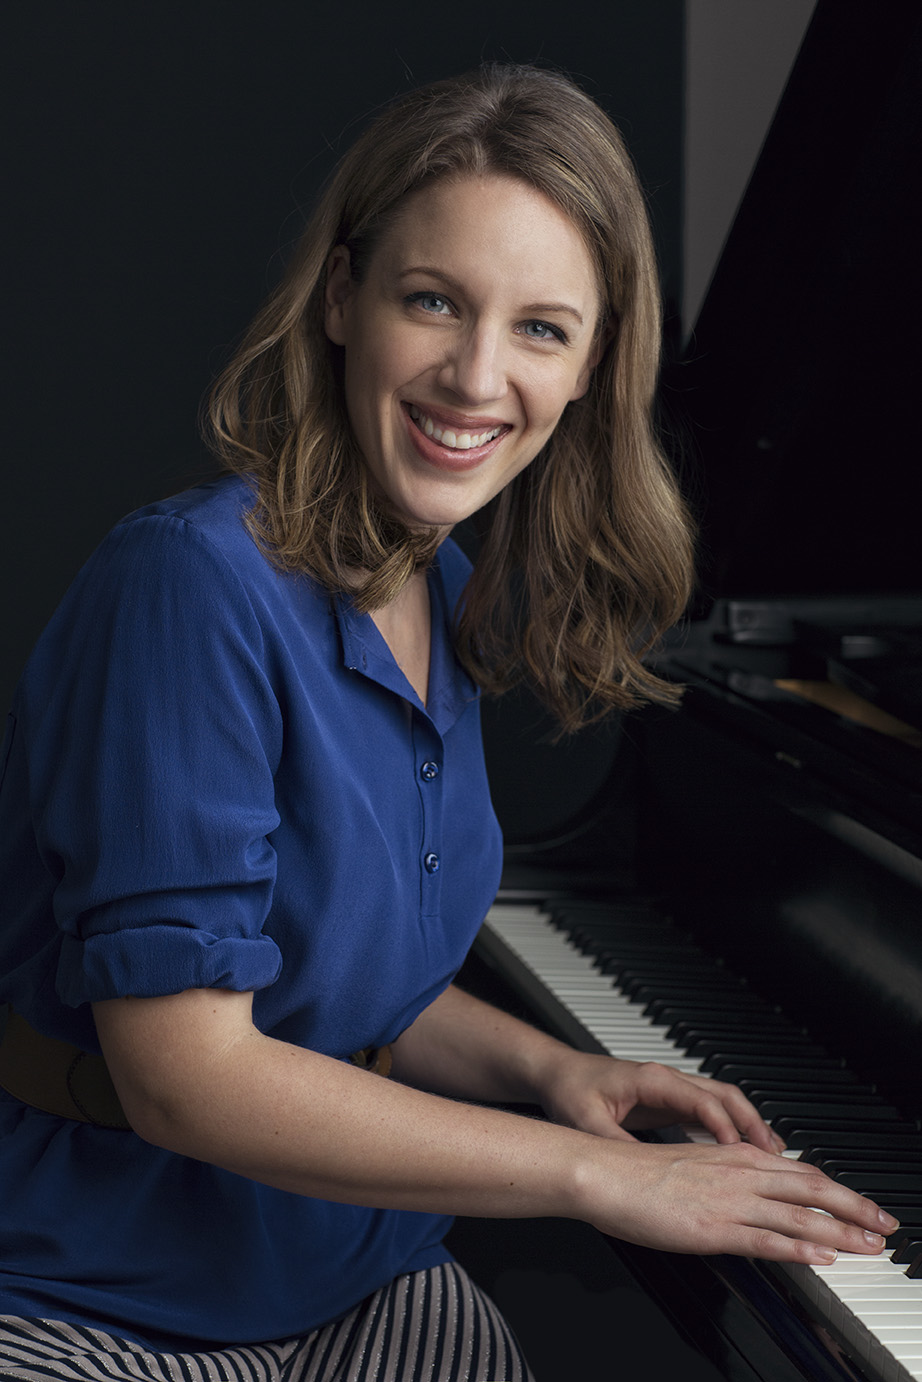 JESSIE MUELLER NAMED SARAH SIDDONS SOCIETY 2015 ACTRESS OF THE YEAR 5 Broadway In Chicago is thrilled to invite high schools across the state of Illinois to participate in the Fifth Annual Illinois High School Musical Theatre Awards. The Illinois High School Musical Theatre Awards celebrate excellence in high school theatre throughout the State of Illinois.